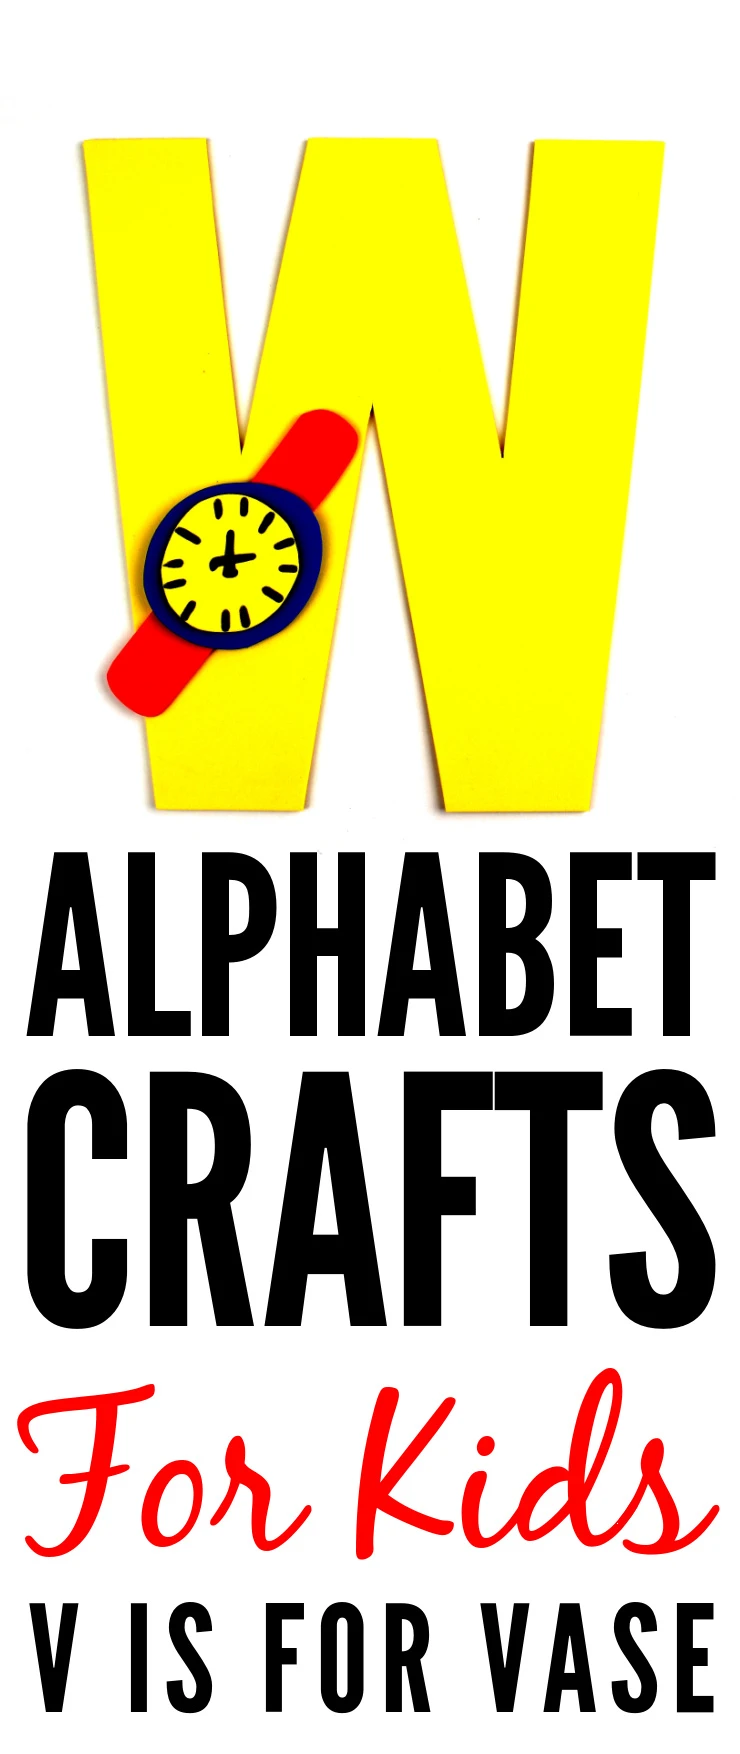 This week in my series of ABCs kids crafts featuring the Alphabet, we are doing a W is for Watch craft. These Alphabet Crafts For Kids are a fun way to introduce your child to the alphabet.